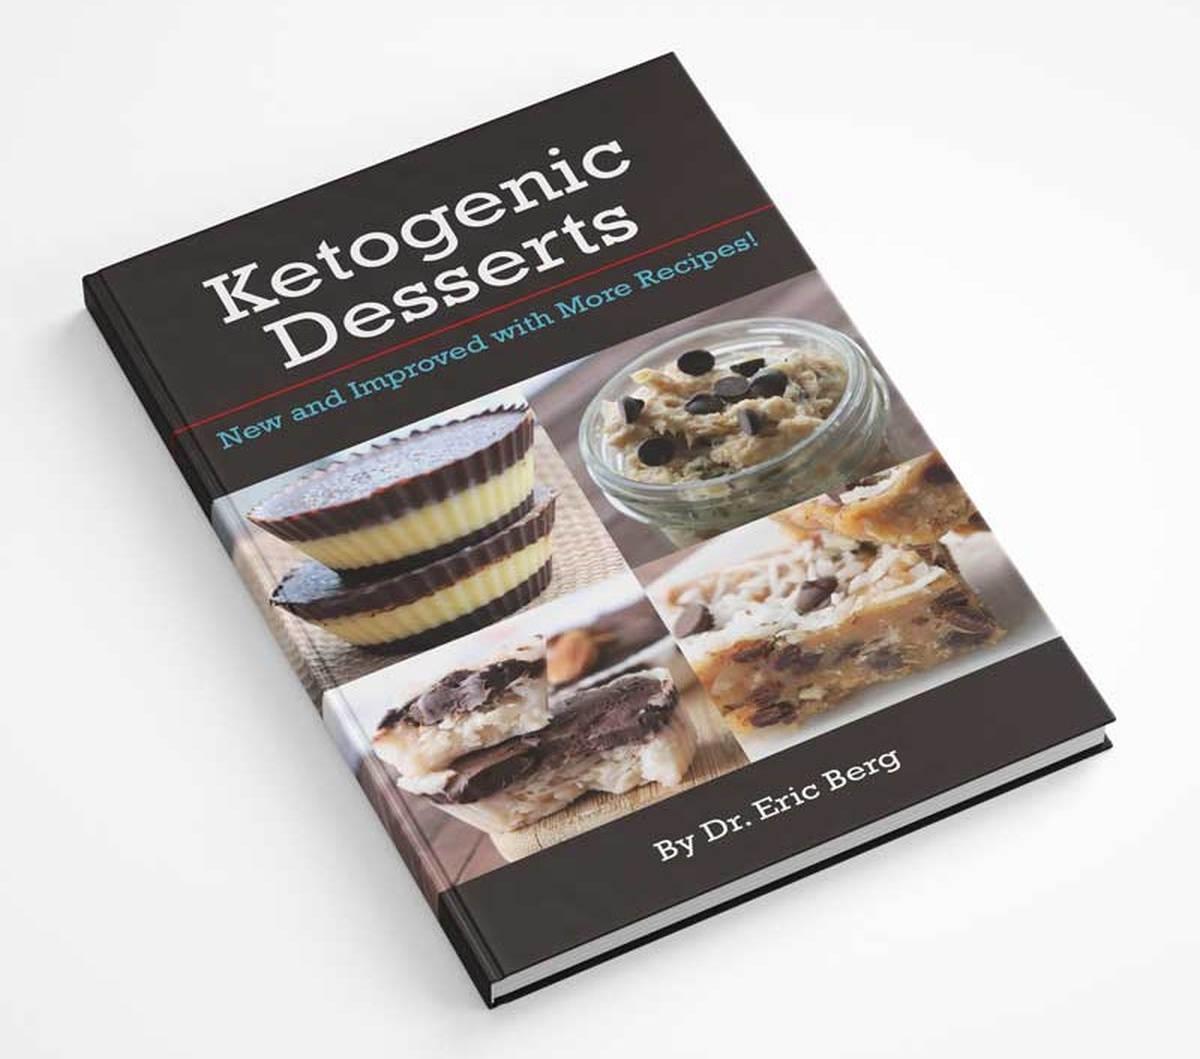 Ketogenic Desserts Recipe Book | Keto Snacks: A Guide to Snacking on the Ketogenic Diet